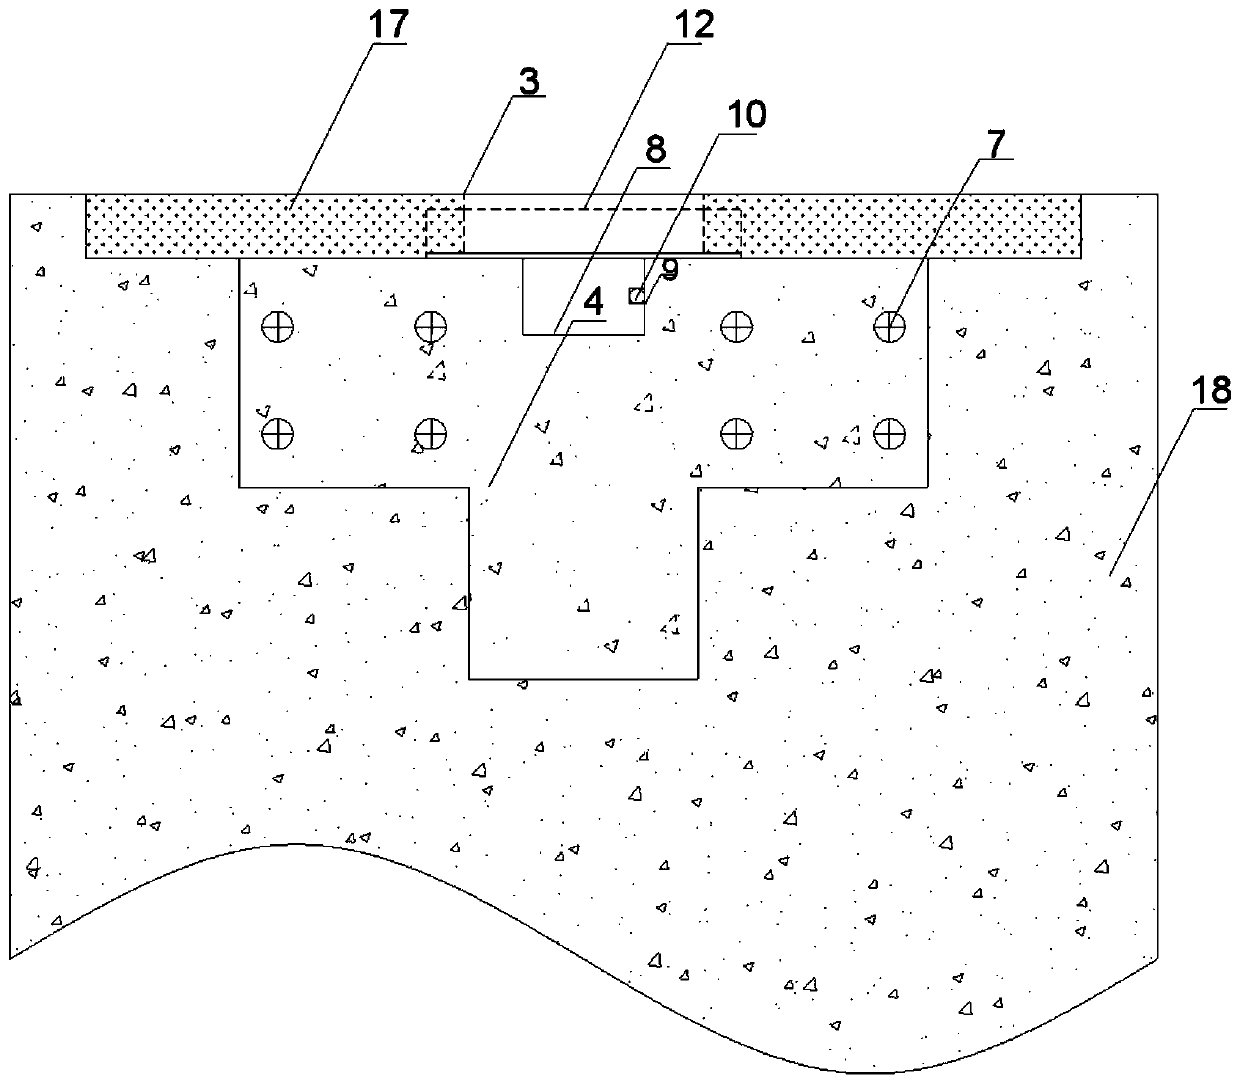 Embedding structure and method for preventing cracking of concrete pavement luminous marks